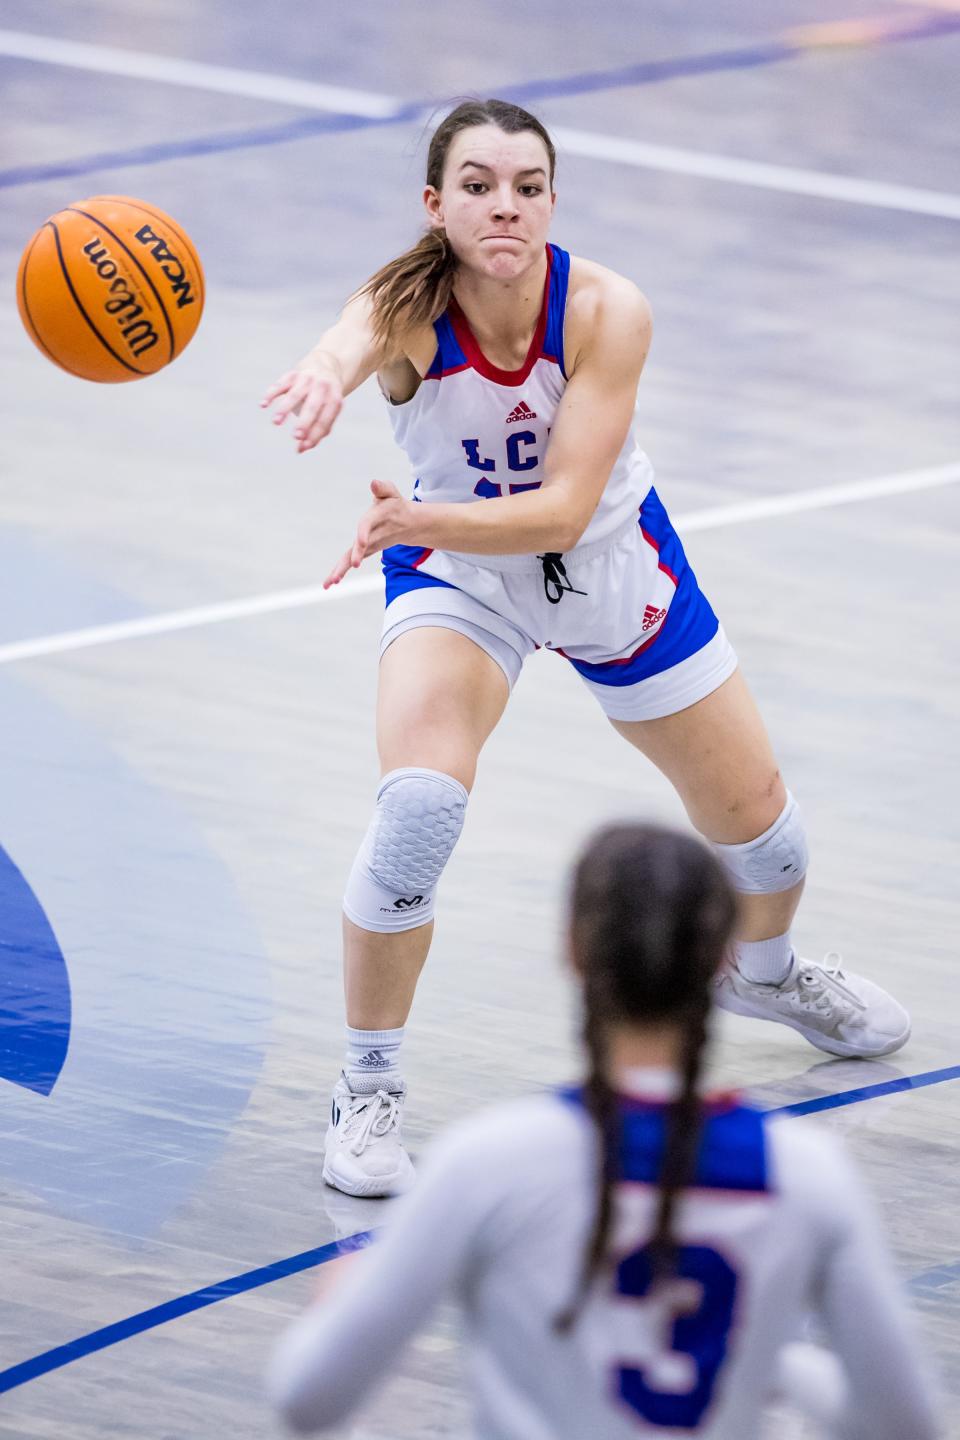 Lubbock Christian University guard Shaylee Stovall and the Lady Chaps are set to face Texas Woman's in the first round of the Division II NCAA Tournament at 2:30 p.m. Friday in San Angelo. TWU beat LCU 84-49 Saturday in the semifinals of the Lone Star Conference tournament.